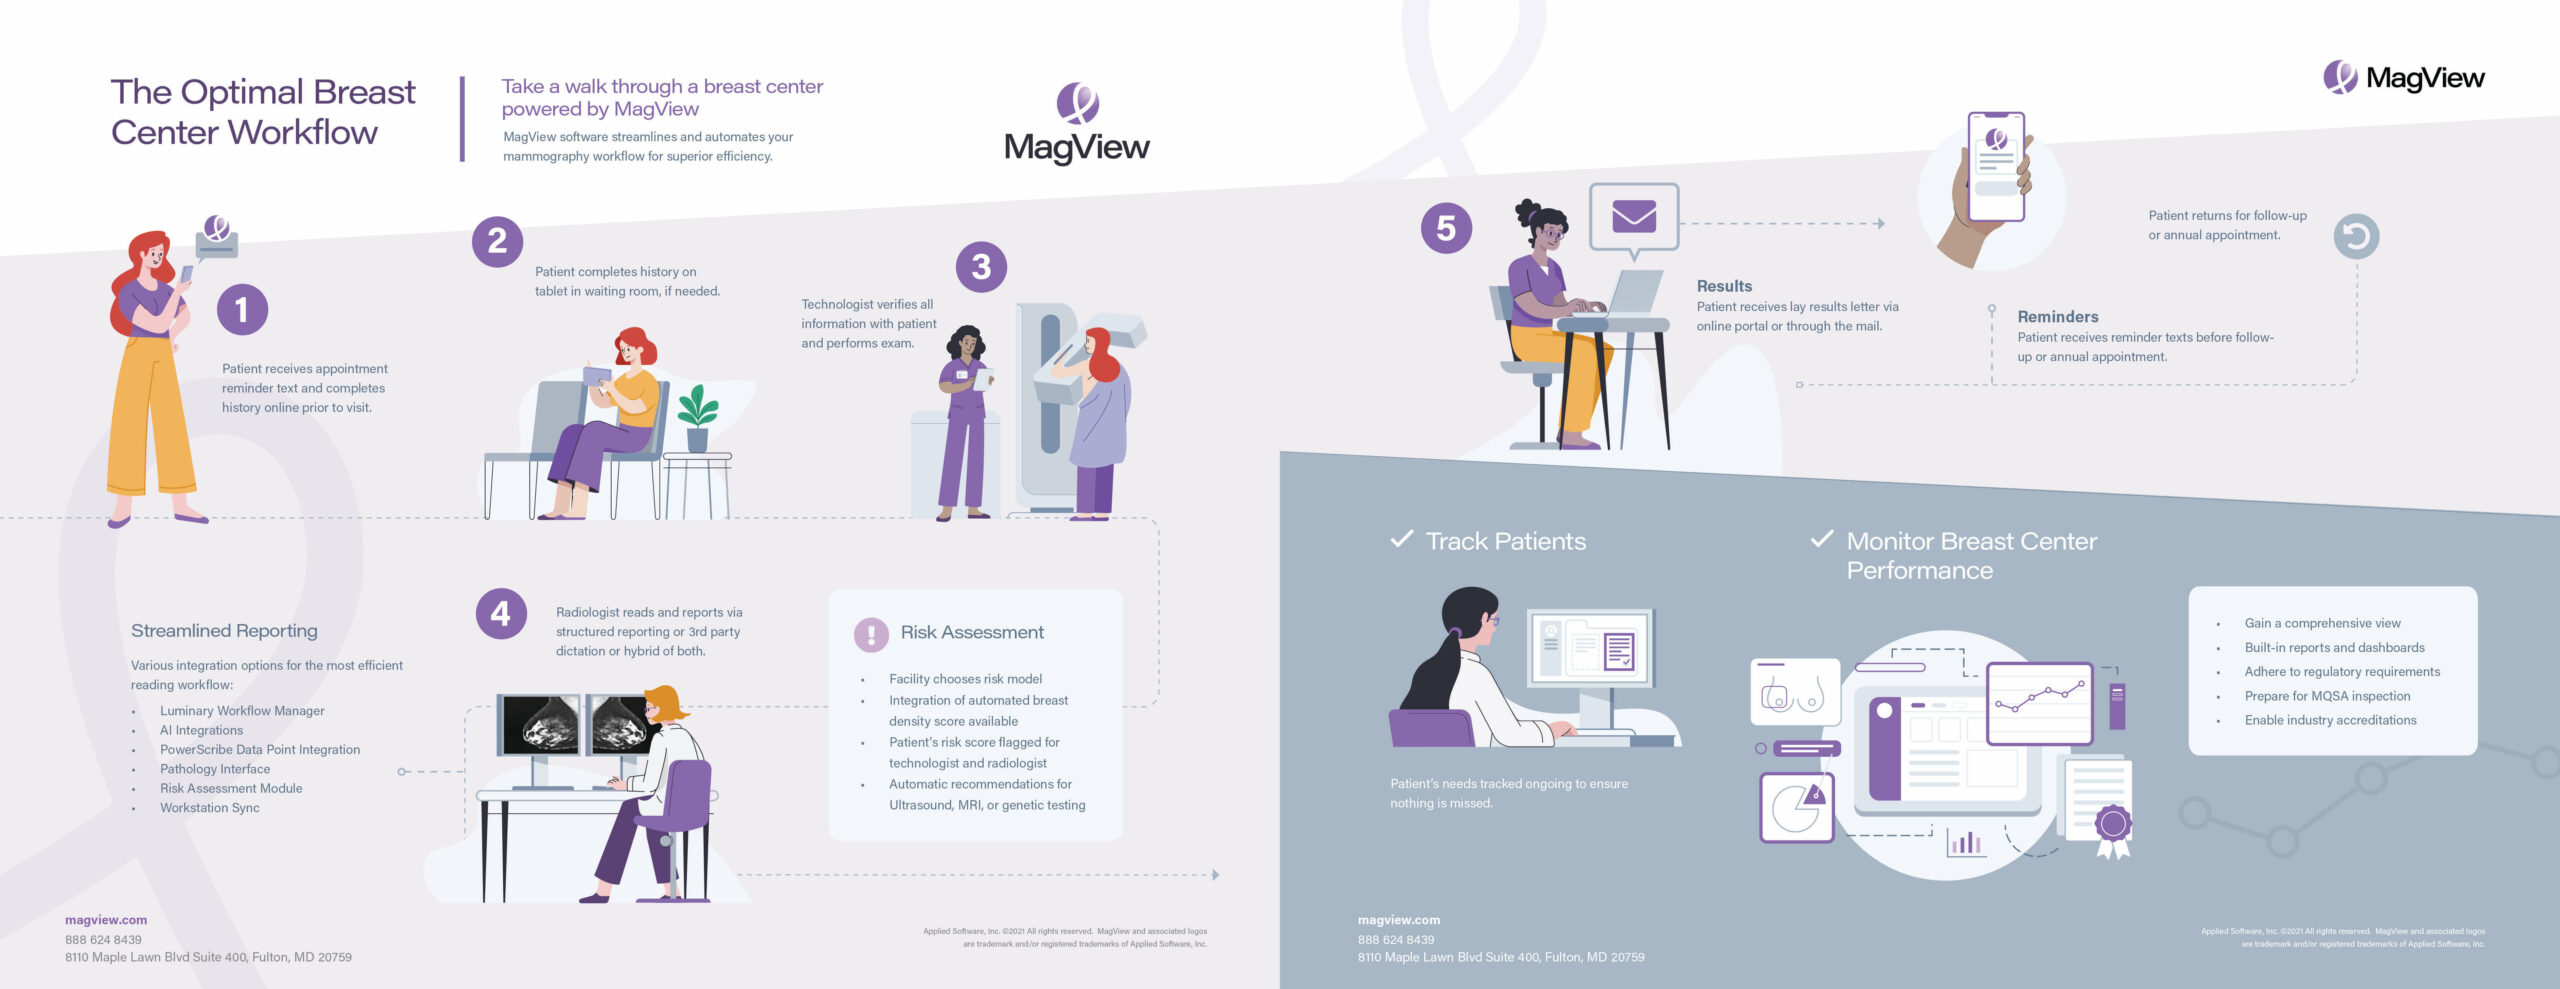 MagView optimal workflow for breast centers and mammography software